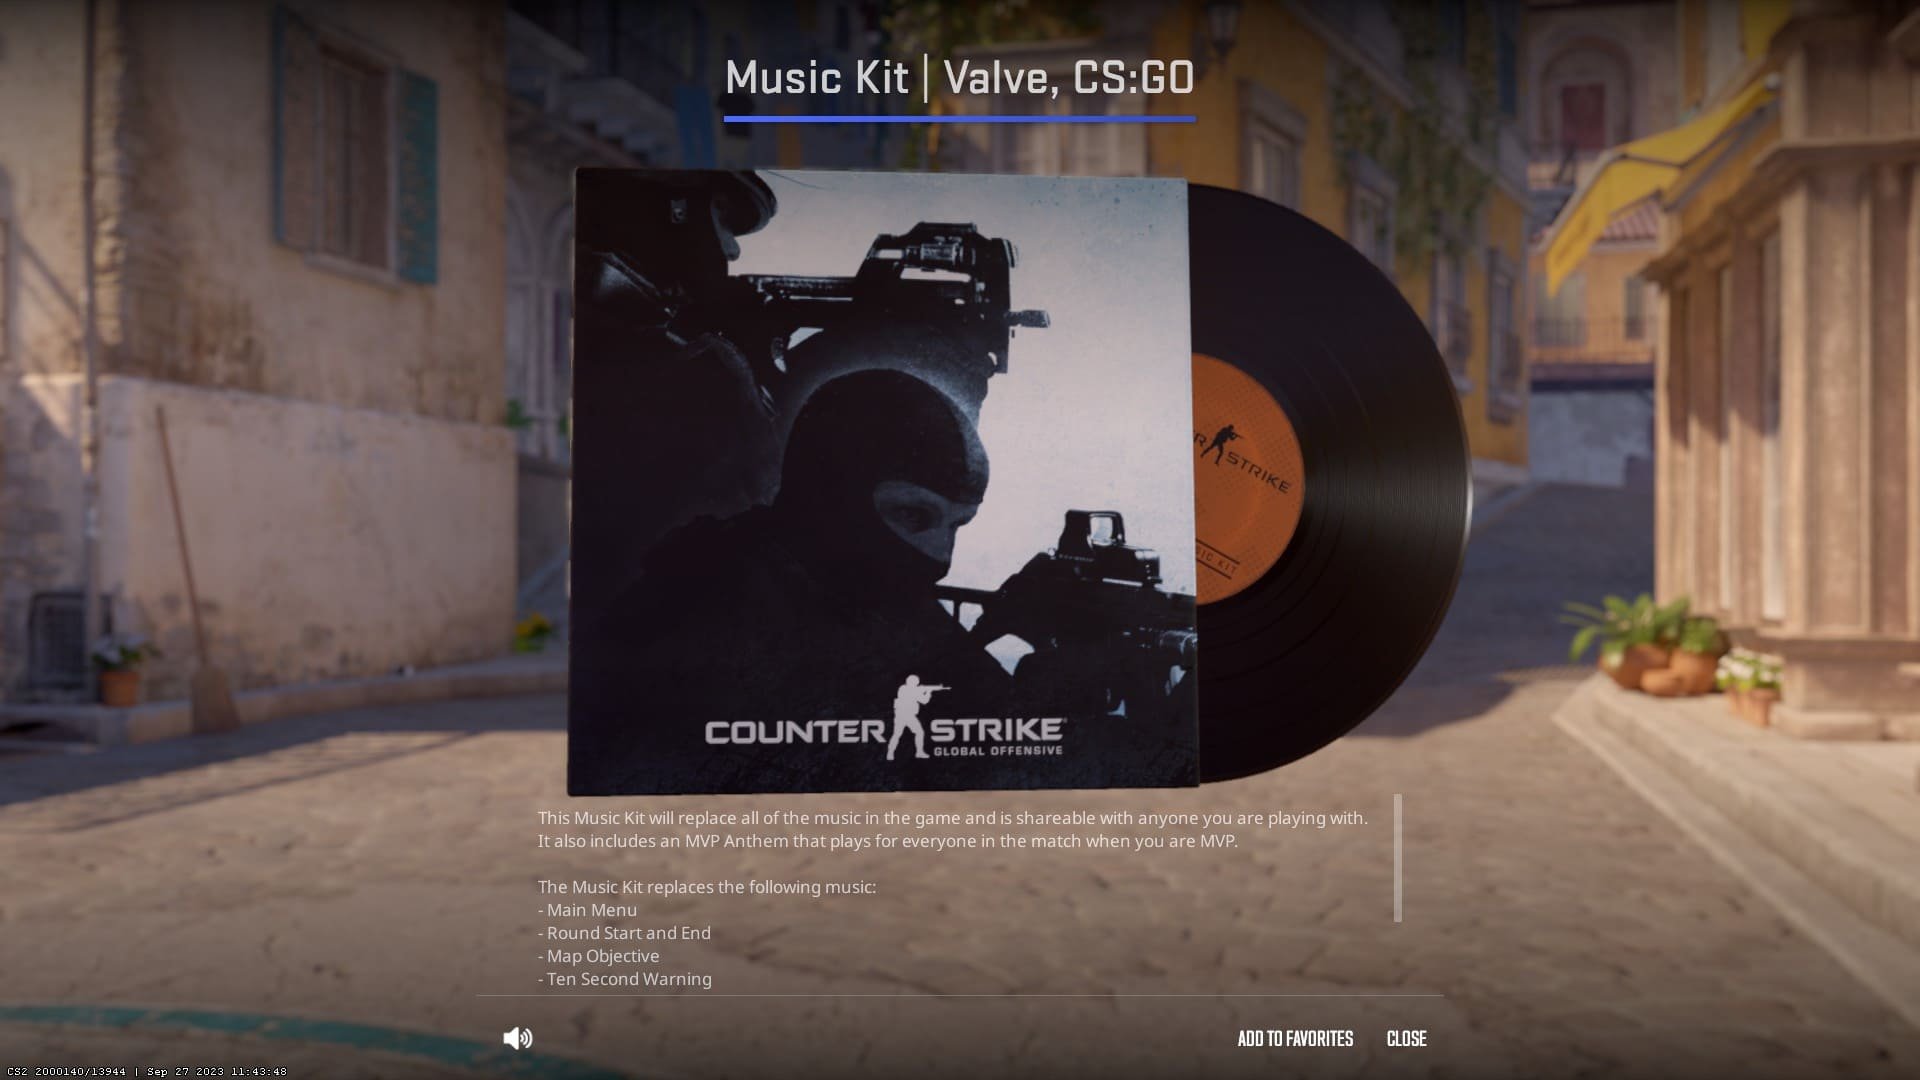 Counter-Strike 2 is officially released! — GamerPay Blog